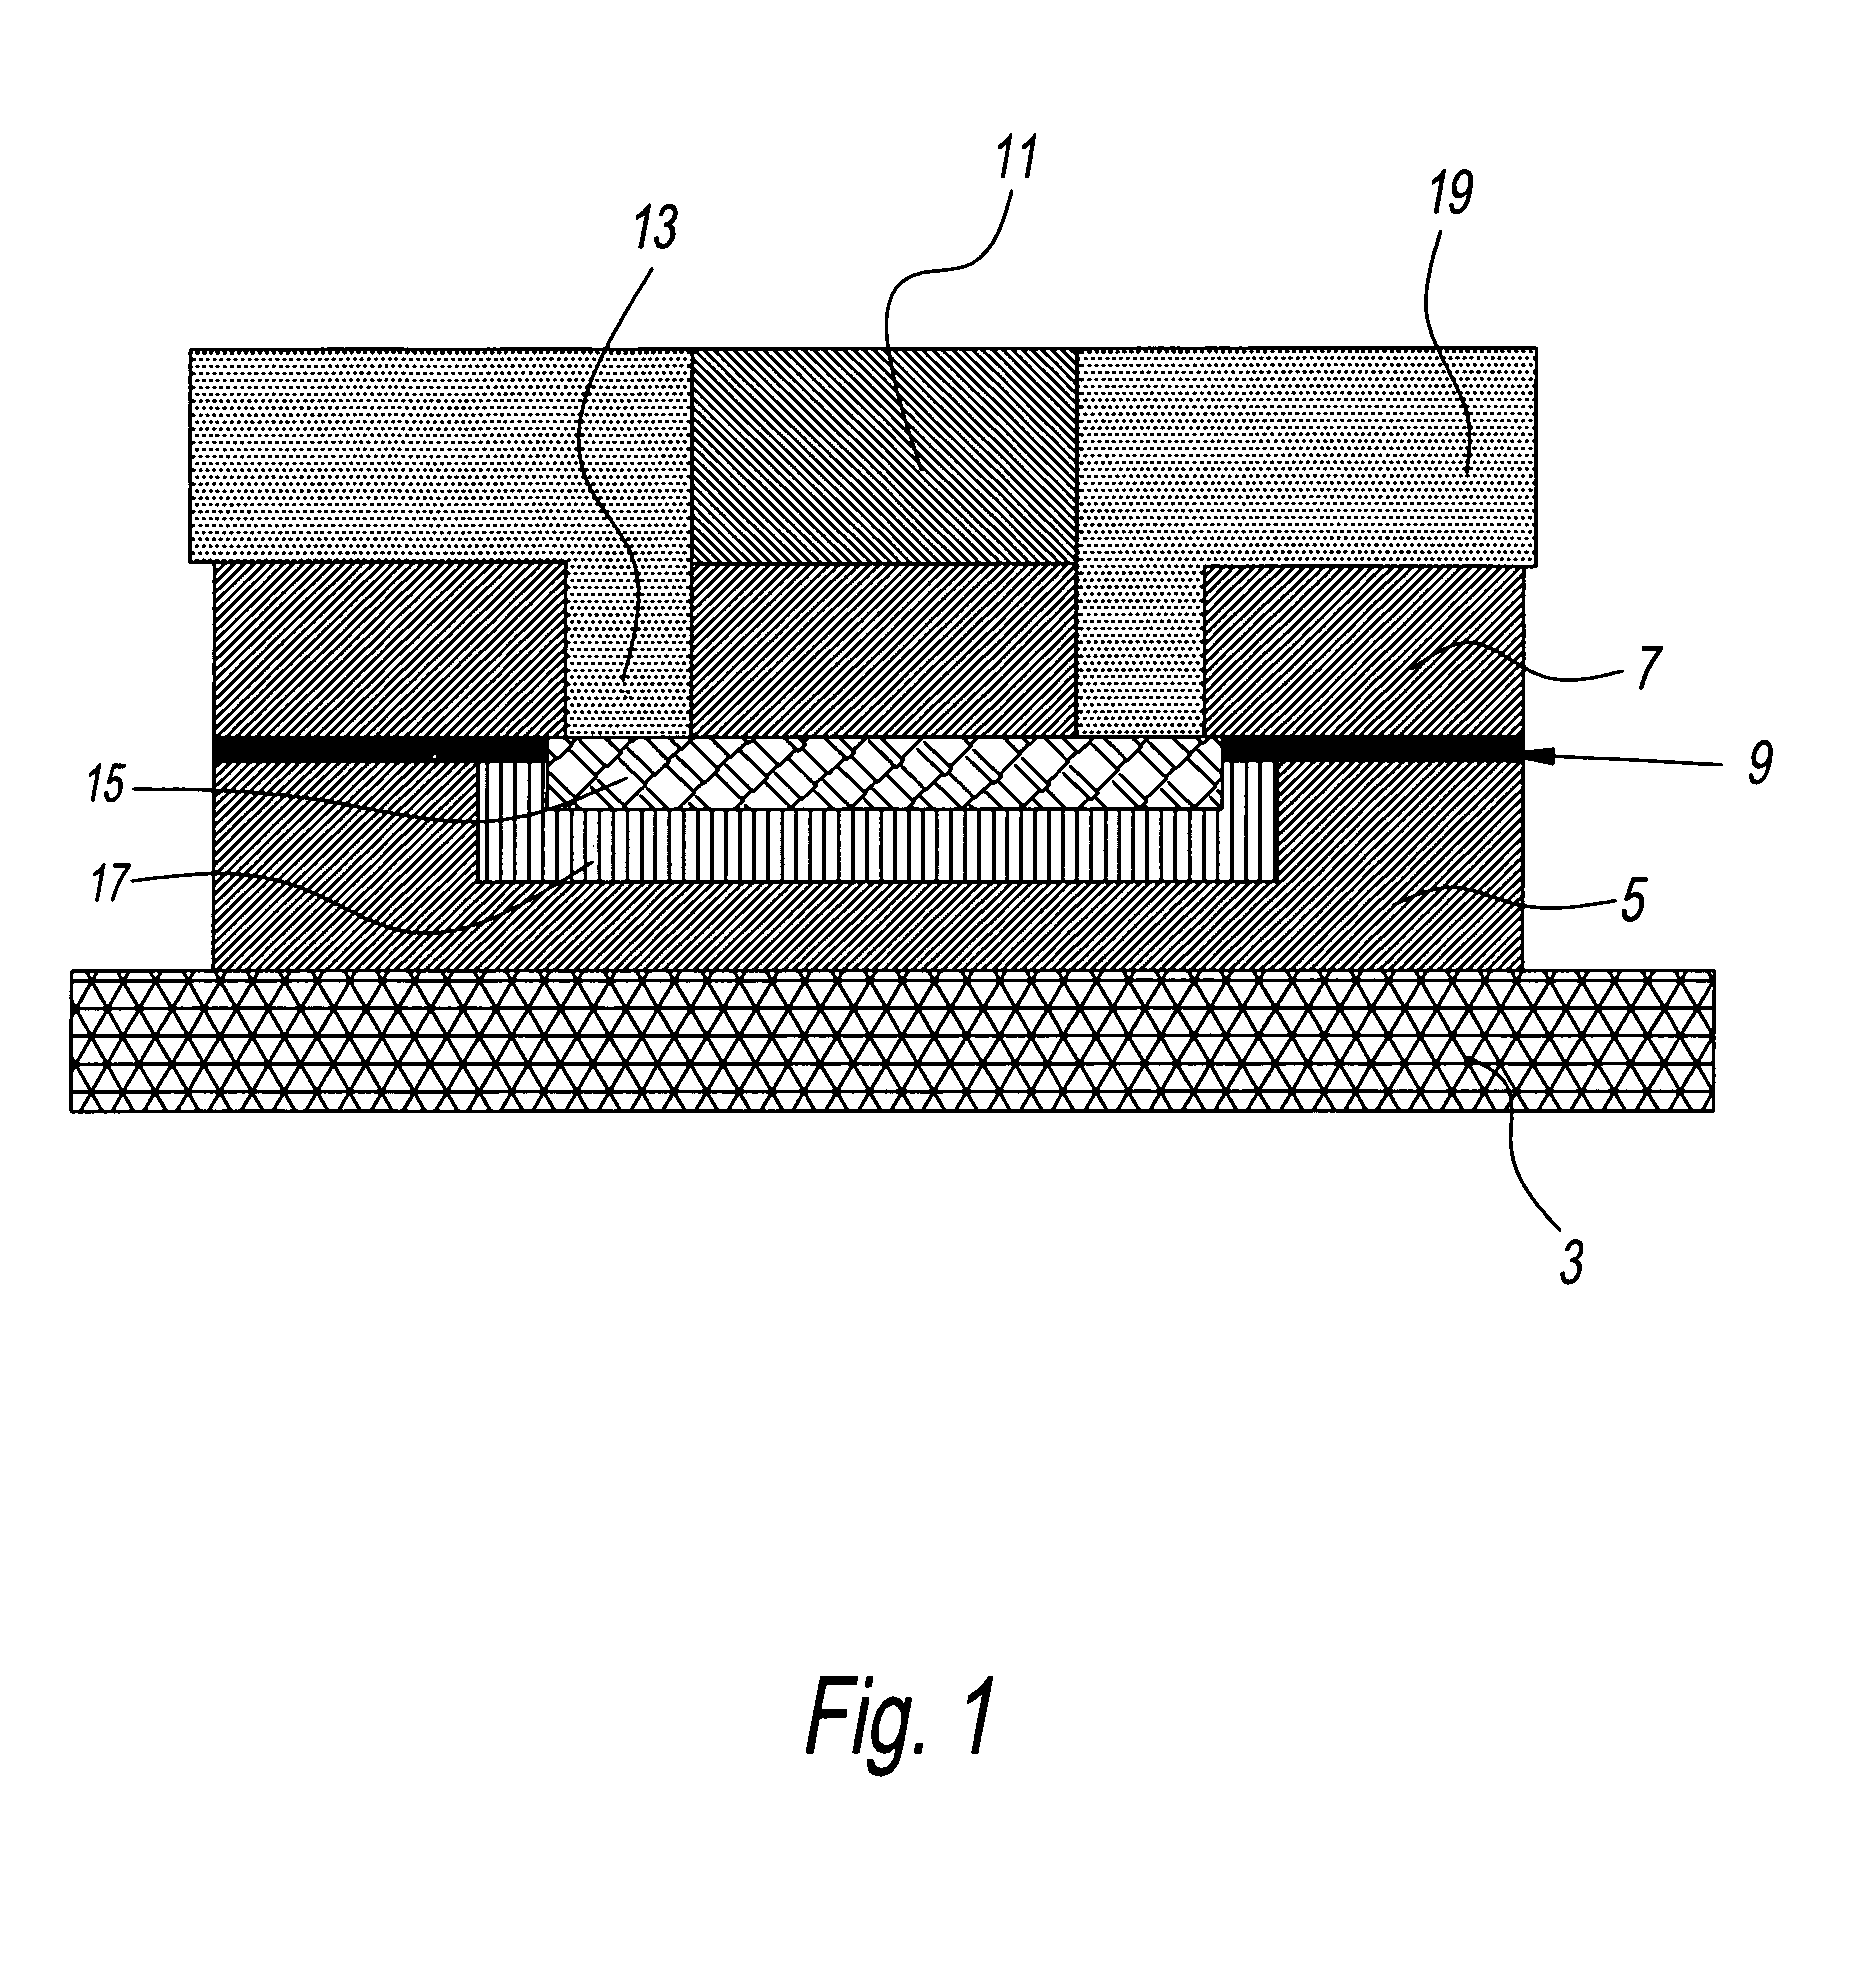 Reprogrammable fuse structure and method